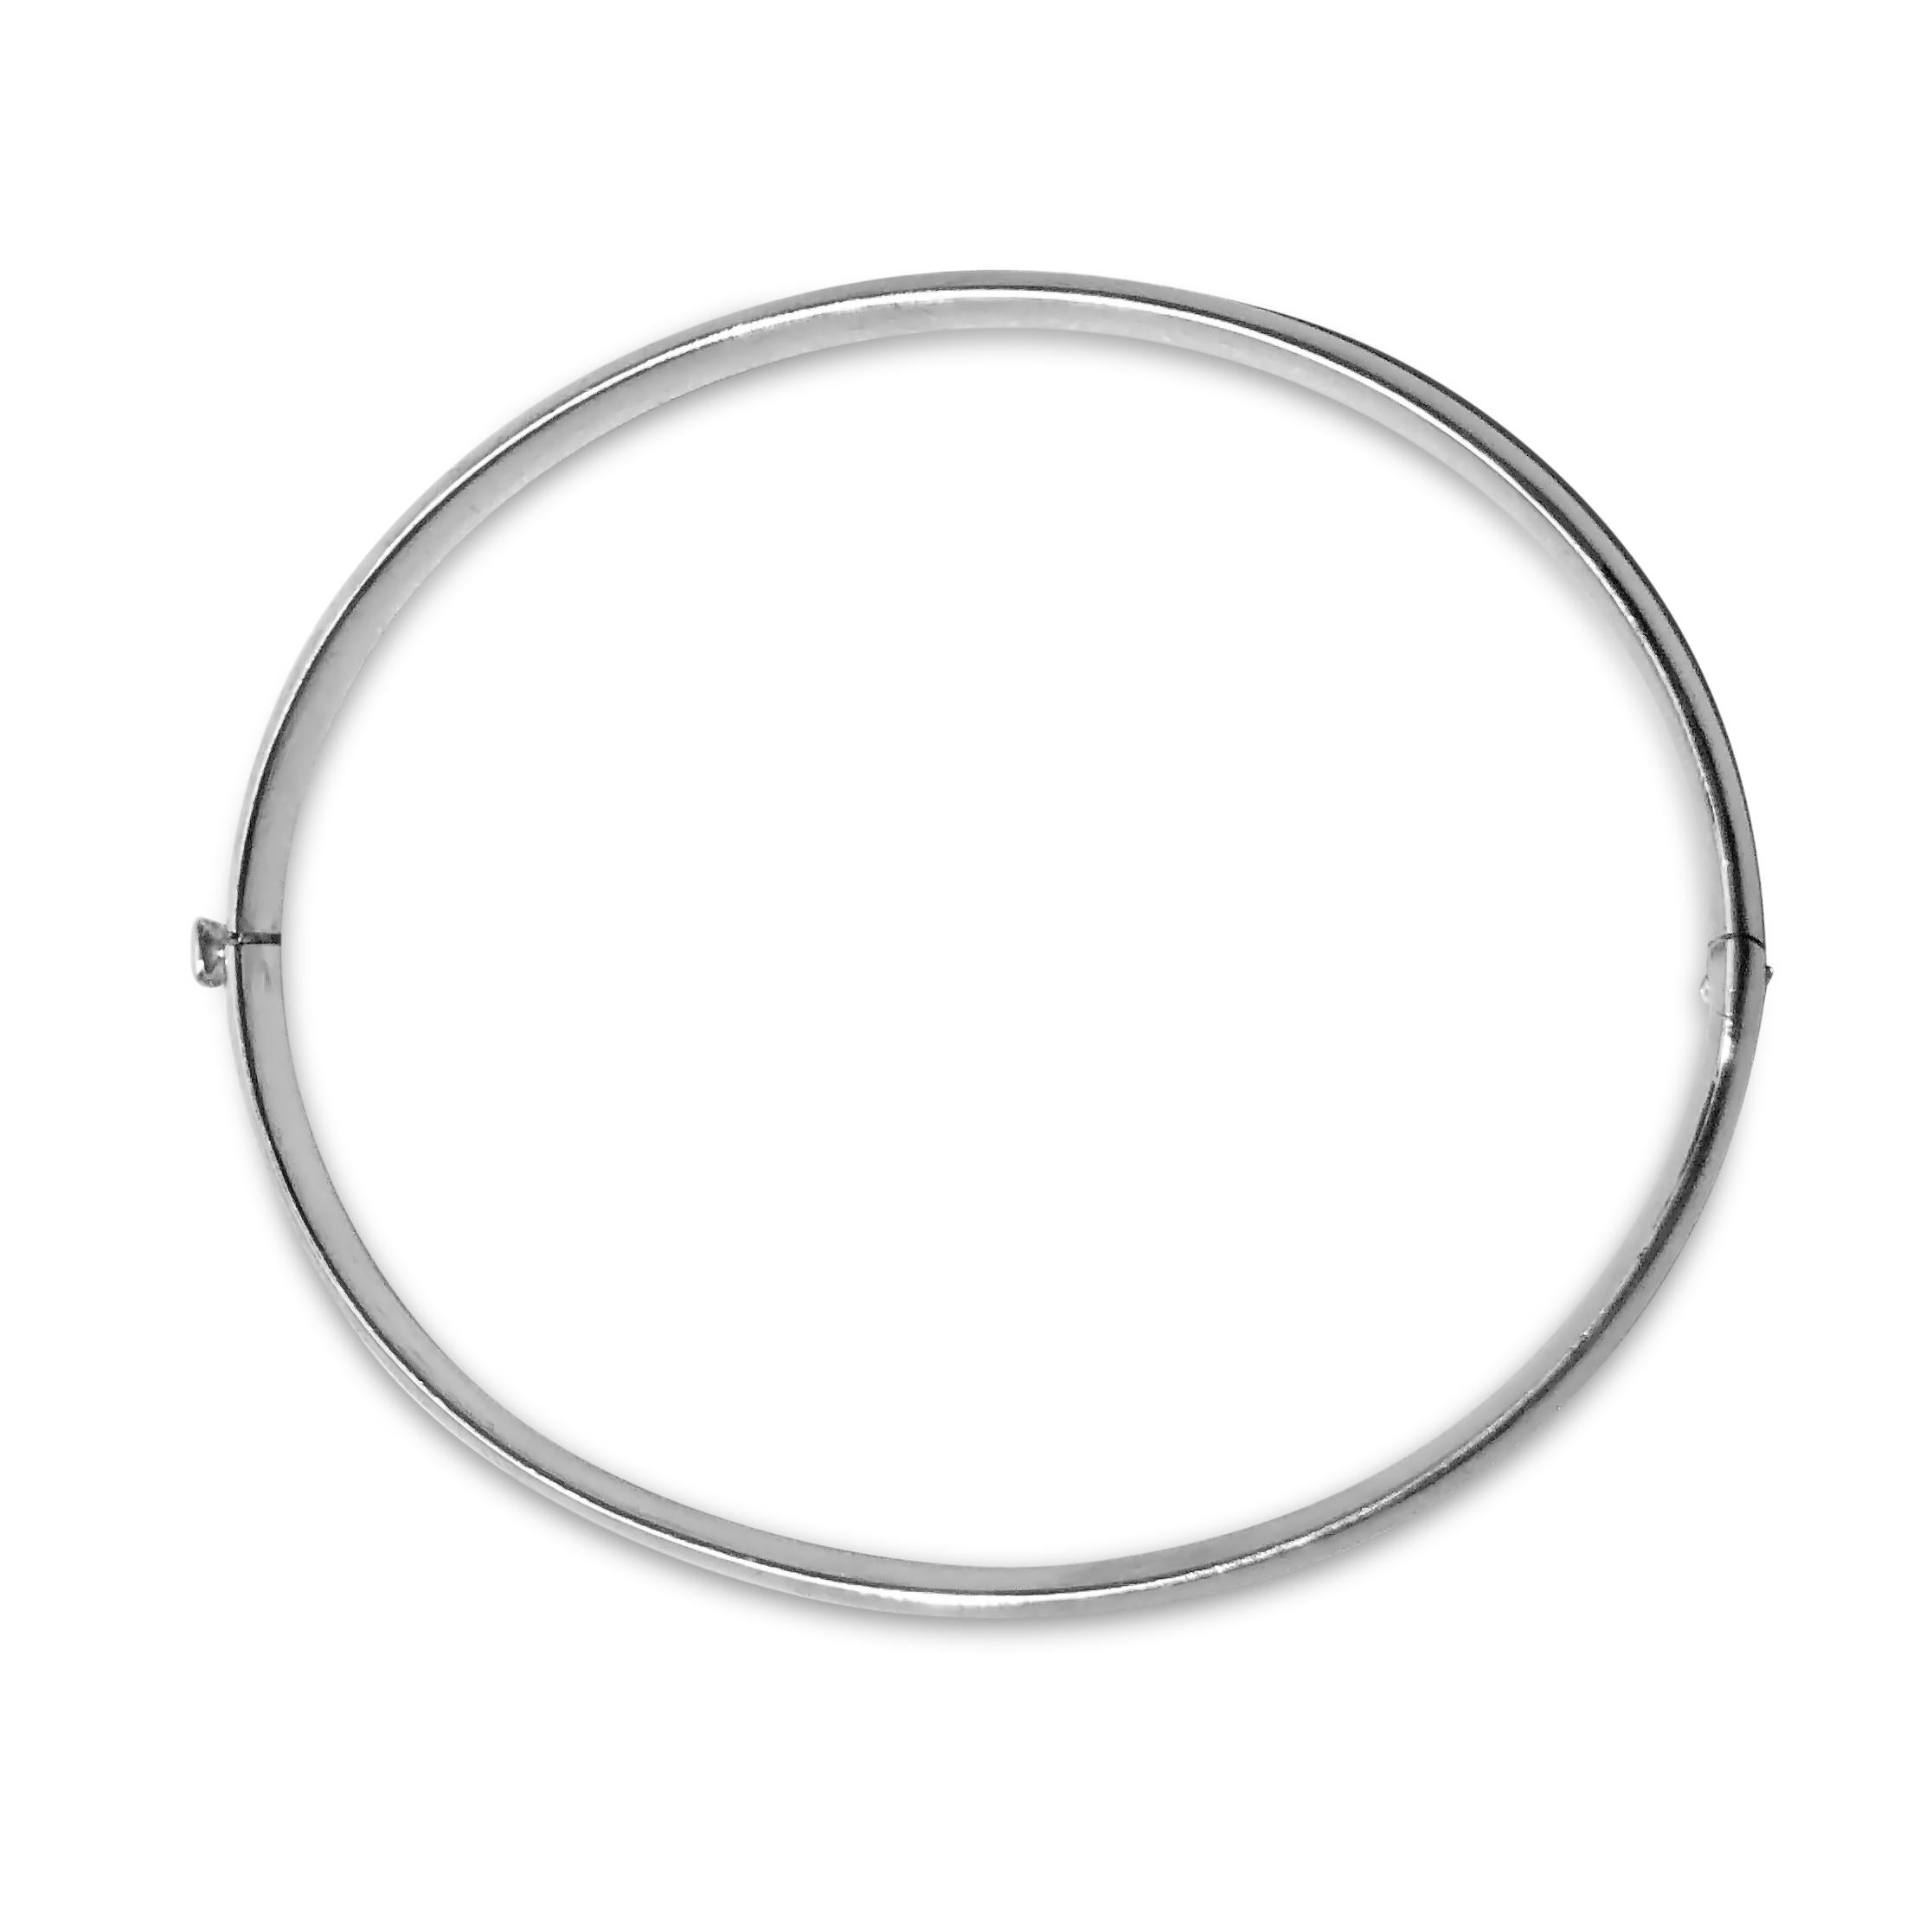 A perfectly classic silver bangle. Our ‘Dome Bright’ .925 sterling silver oval-shaped bracelet is 3/16 inches in width and securely closes with a snap & hinge.

Specifications:
- Shape: Oval
- Metal(s): Silver
- Dimension: 6 5/8